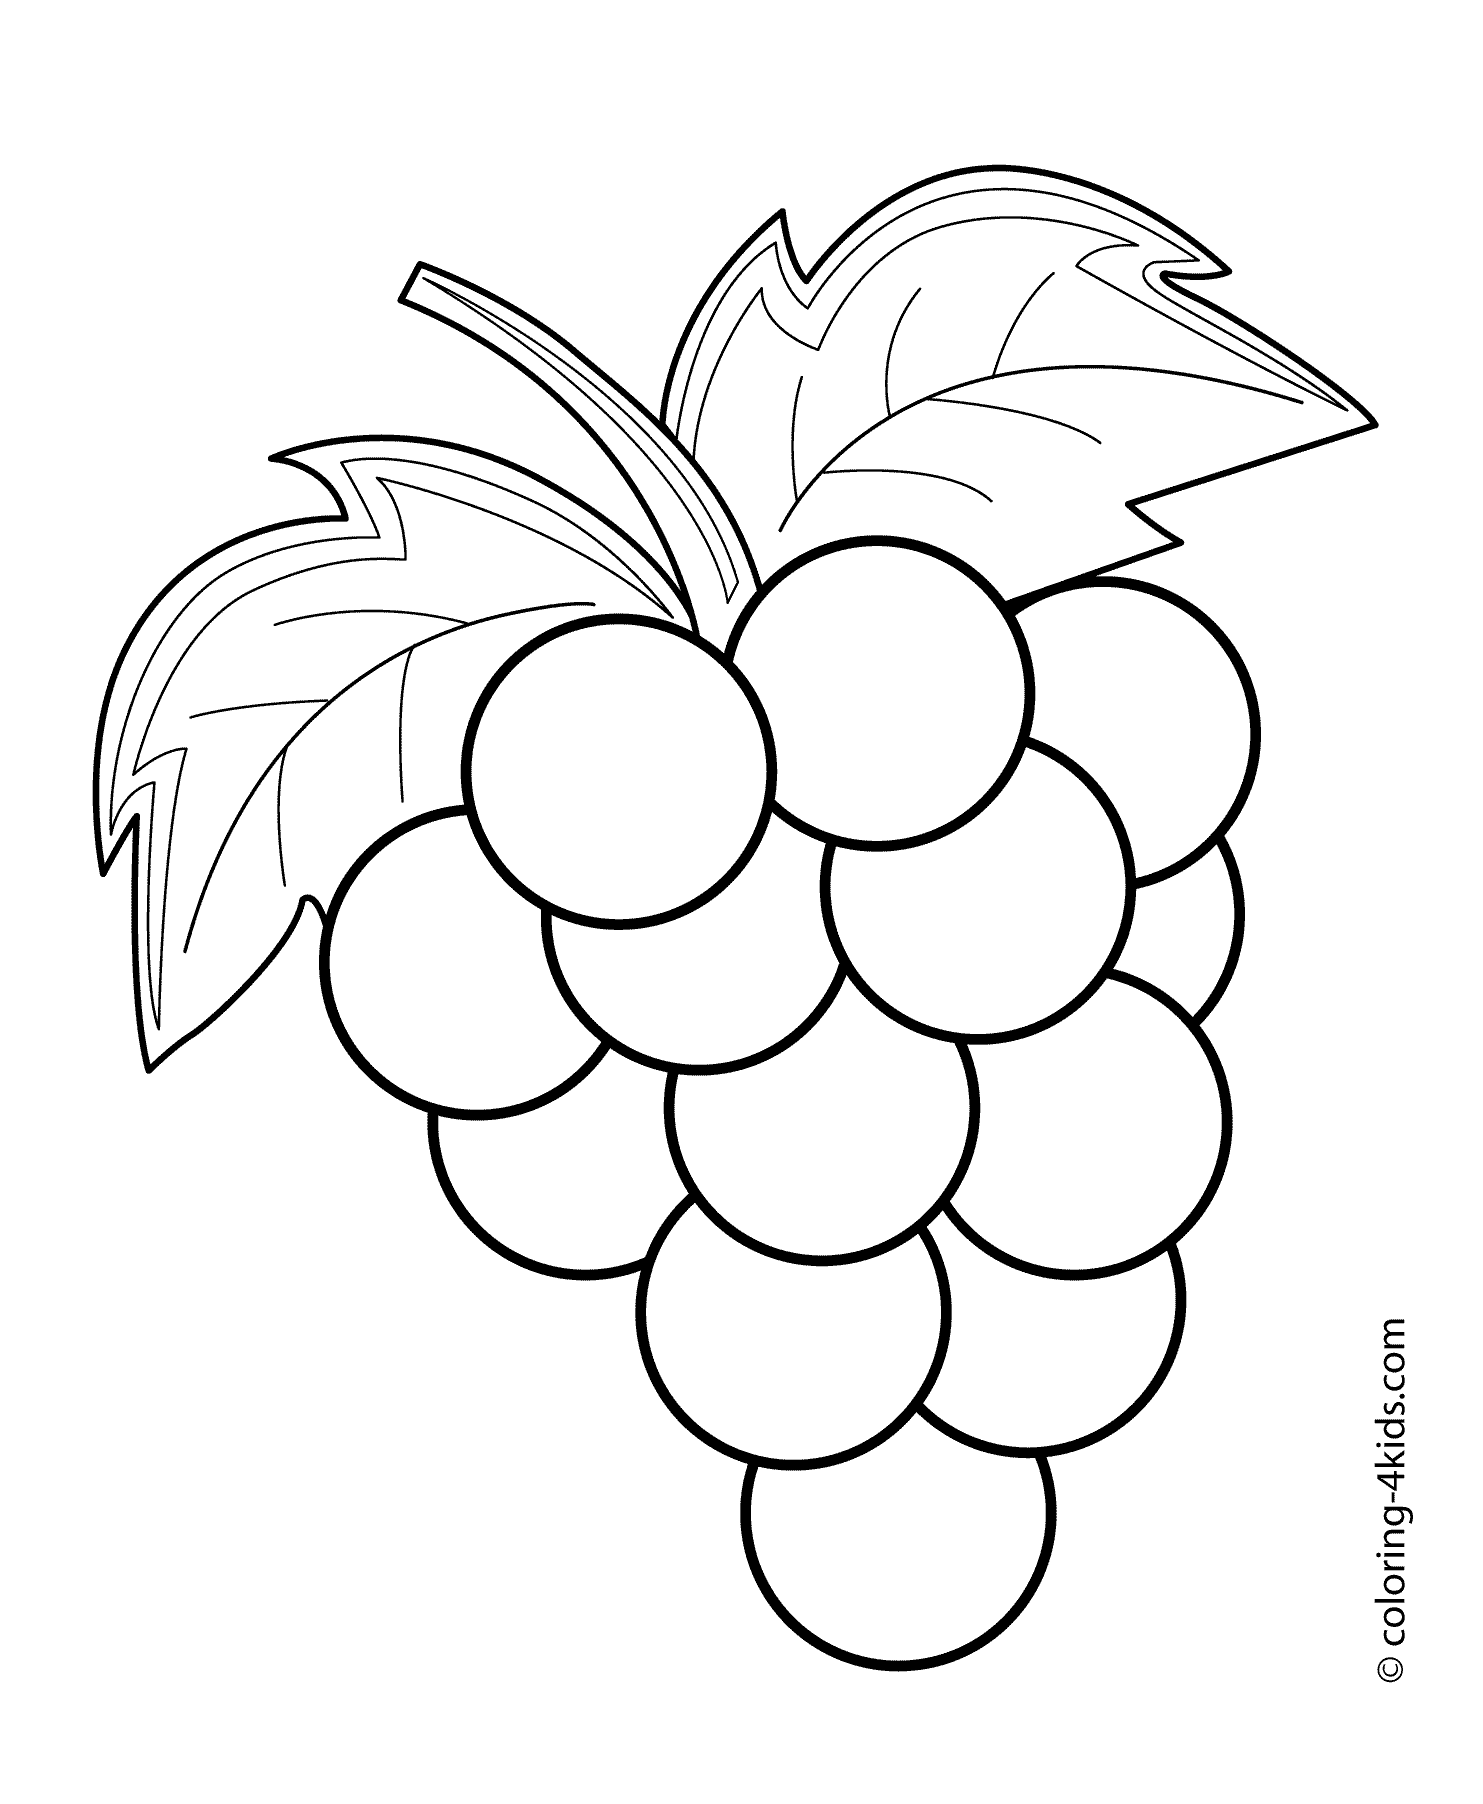 Grapes fruits and berries. Grape clipart simple